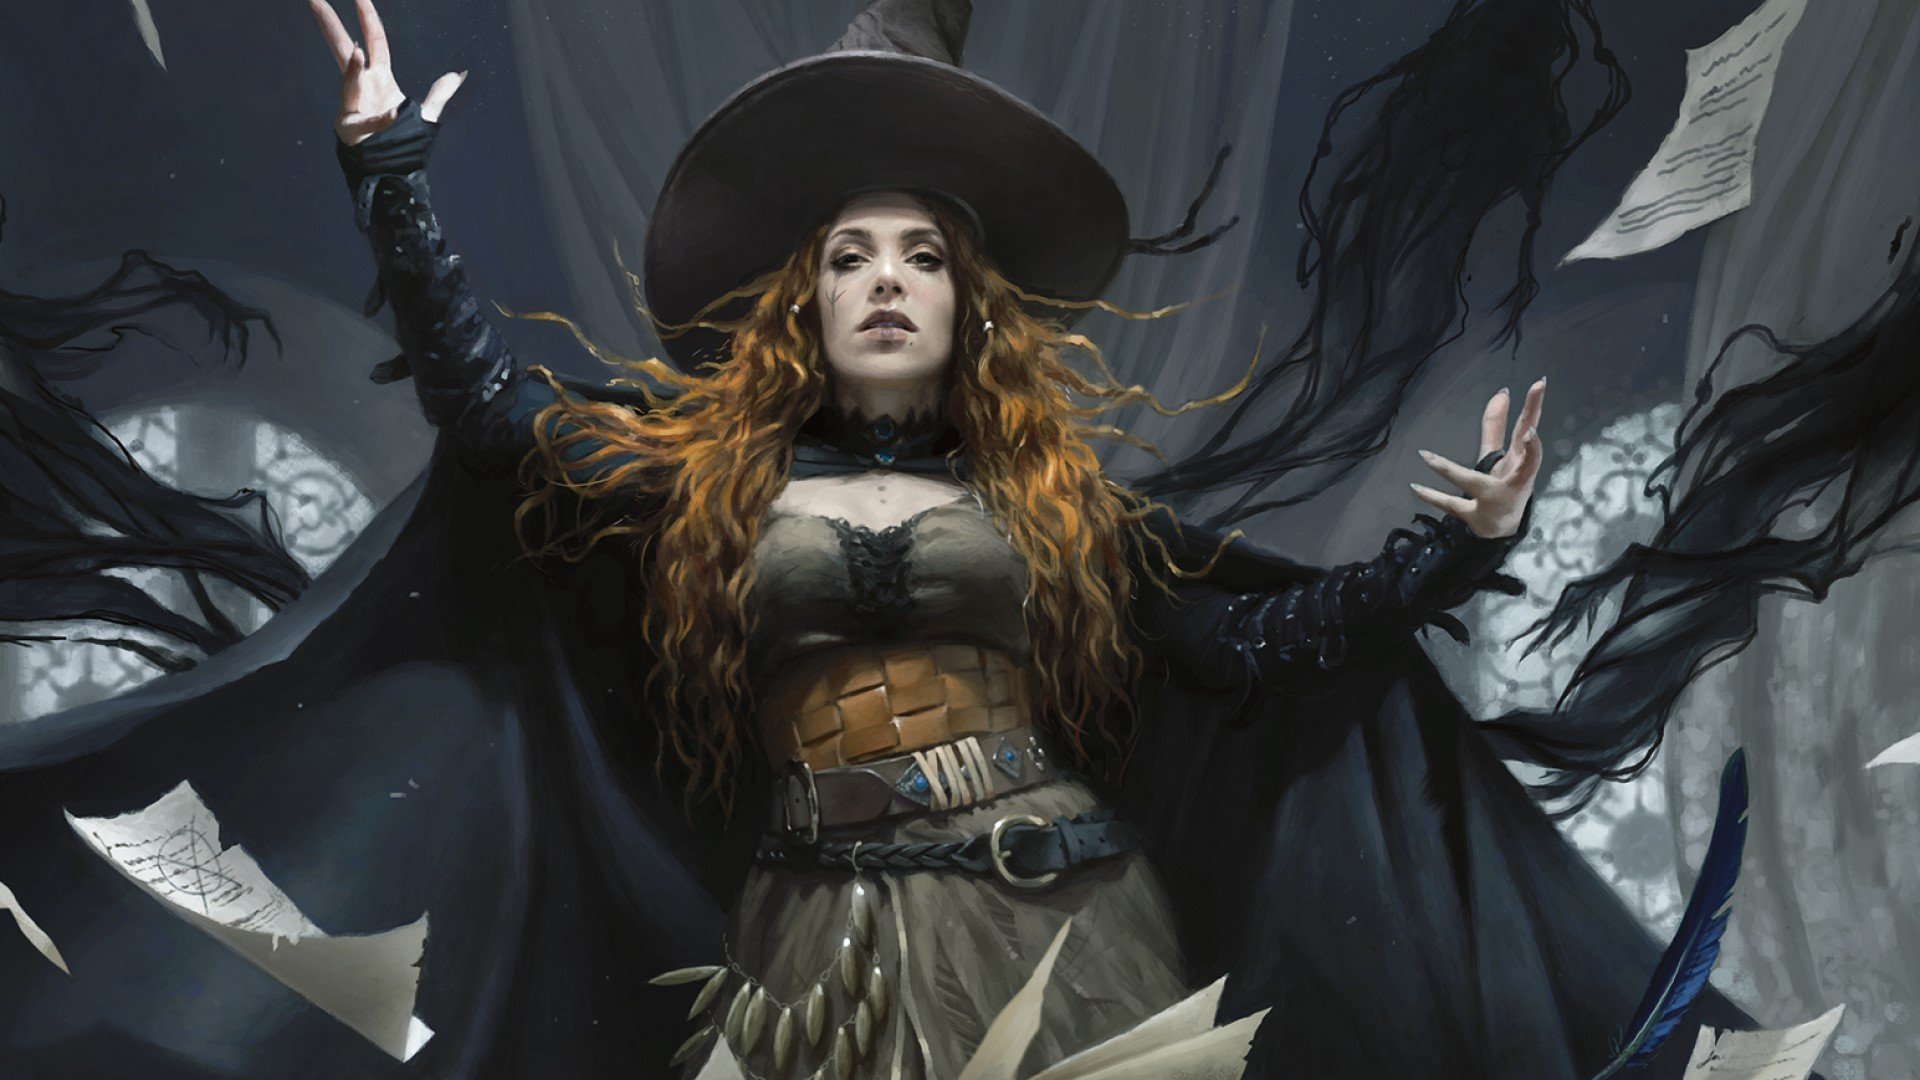 DnD eldritch blast 5e - a witch opening a spellbook with magic.